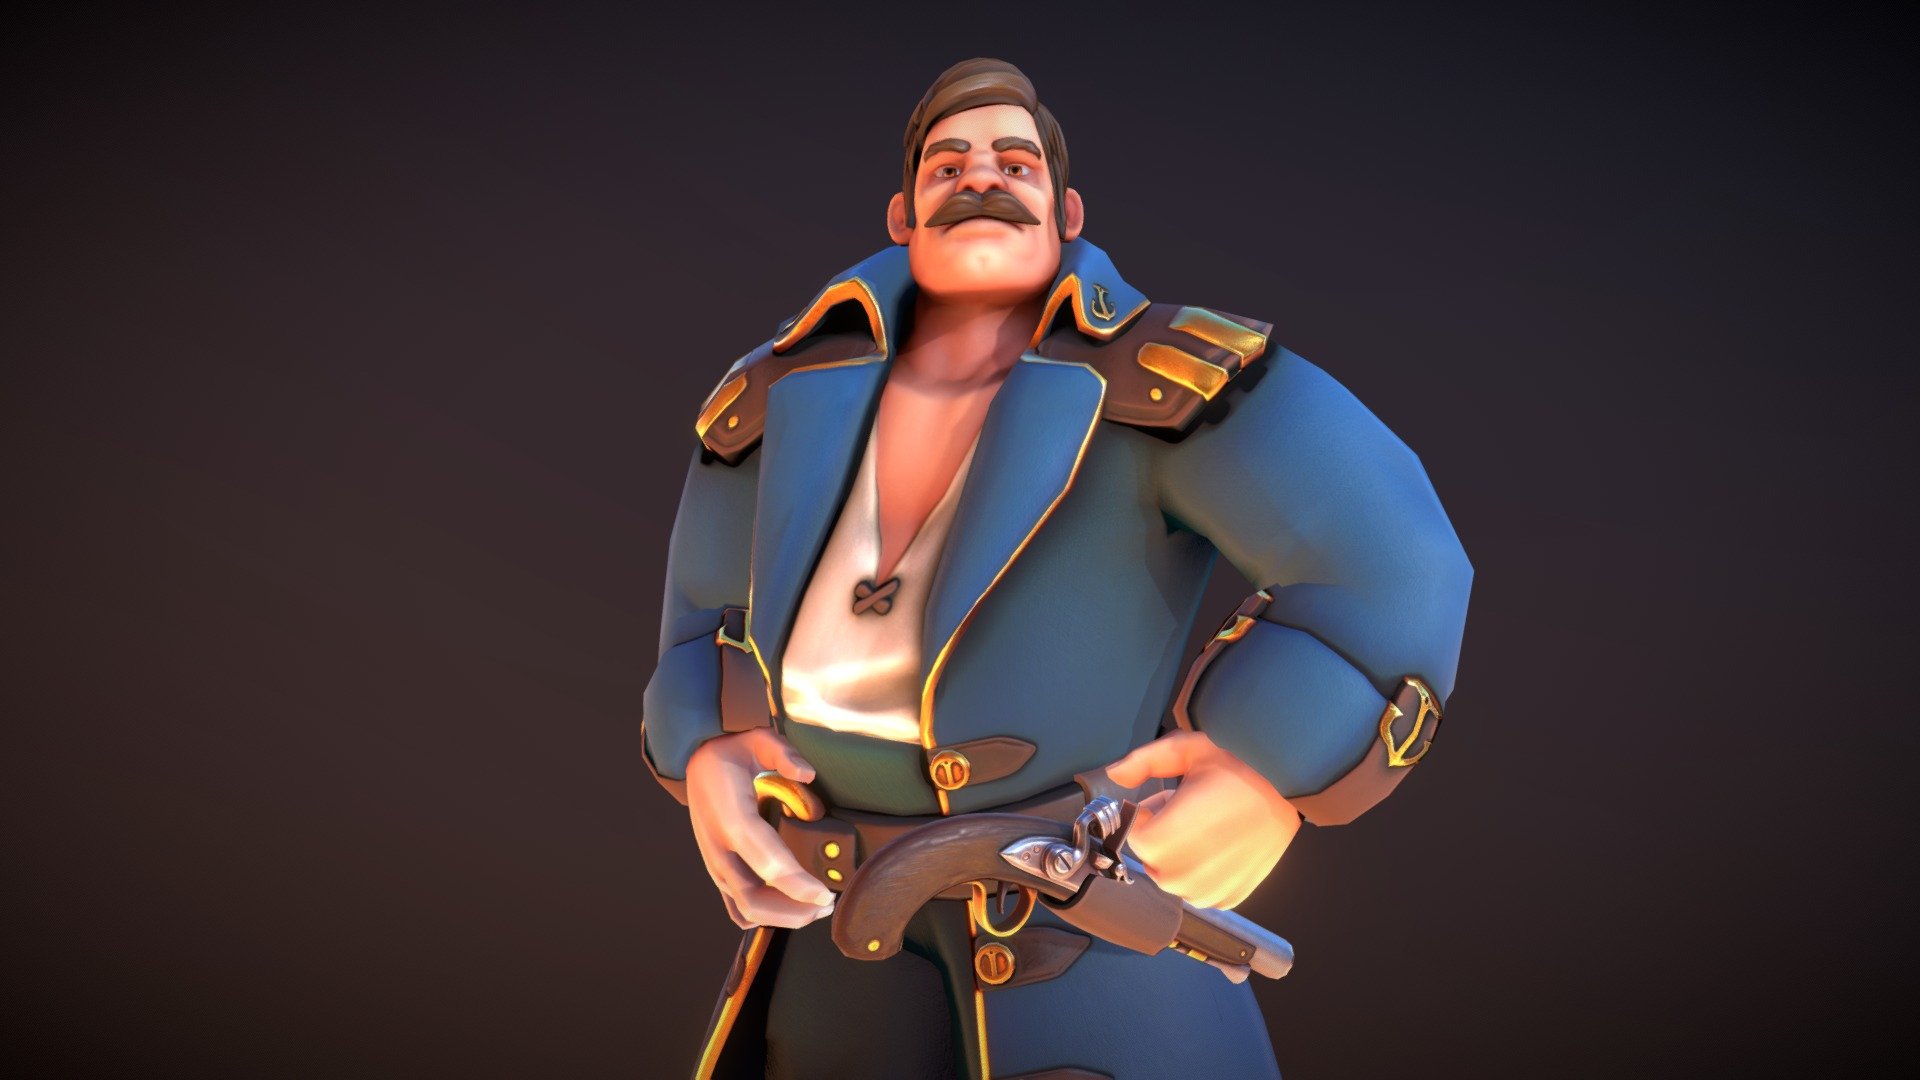 Meet the captain, the first in a series of nautical themed characters. 



He is a low to mid poly character created for easy use in your project. The model is created with a pbr pipeline and includes textures to be used with popular realtime engines.

He uses a standardised human rig to allow animation mapping from many sources such as mocap data from mixamo. 

The skeleton does contain some extra joints for bespoke animation/dynamic joints a simple face rig and some fun blendshapes.



The download contains. 

-2 fbx files of the skinned character, one without blendshapes and one with. 

-a maya lt file with the skinned meshes and blendshapes. 

-Separate objs of the blendshapes

-3 sets of high res textures. Standard pbr, unity and unreal.

follow me on Twitter - Seafarer : The Captain - Buy Royalty Free 3D model by Team Hushkal Studios (@Hushkal) 3d model